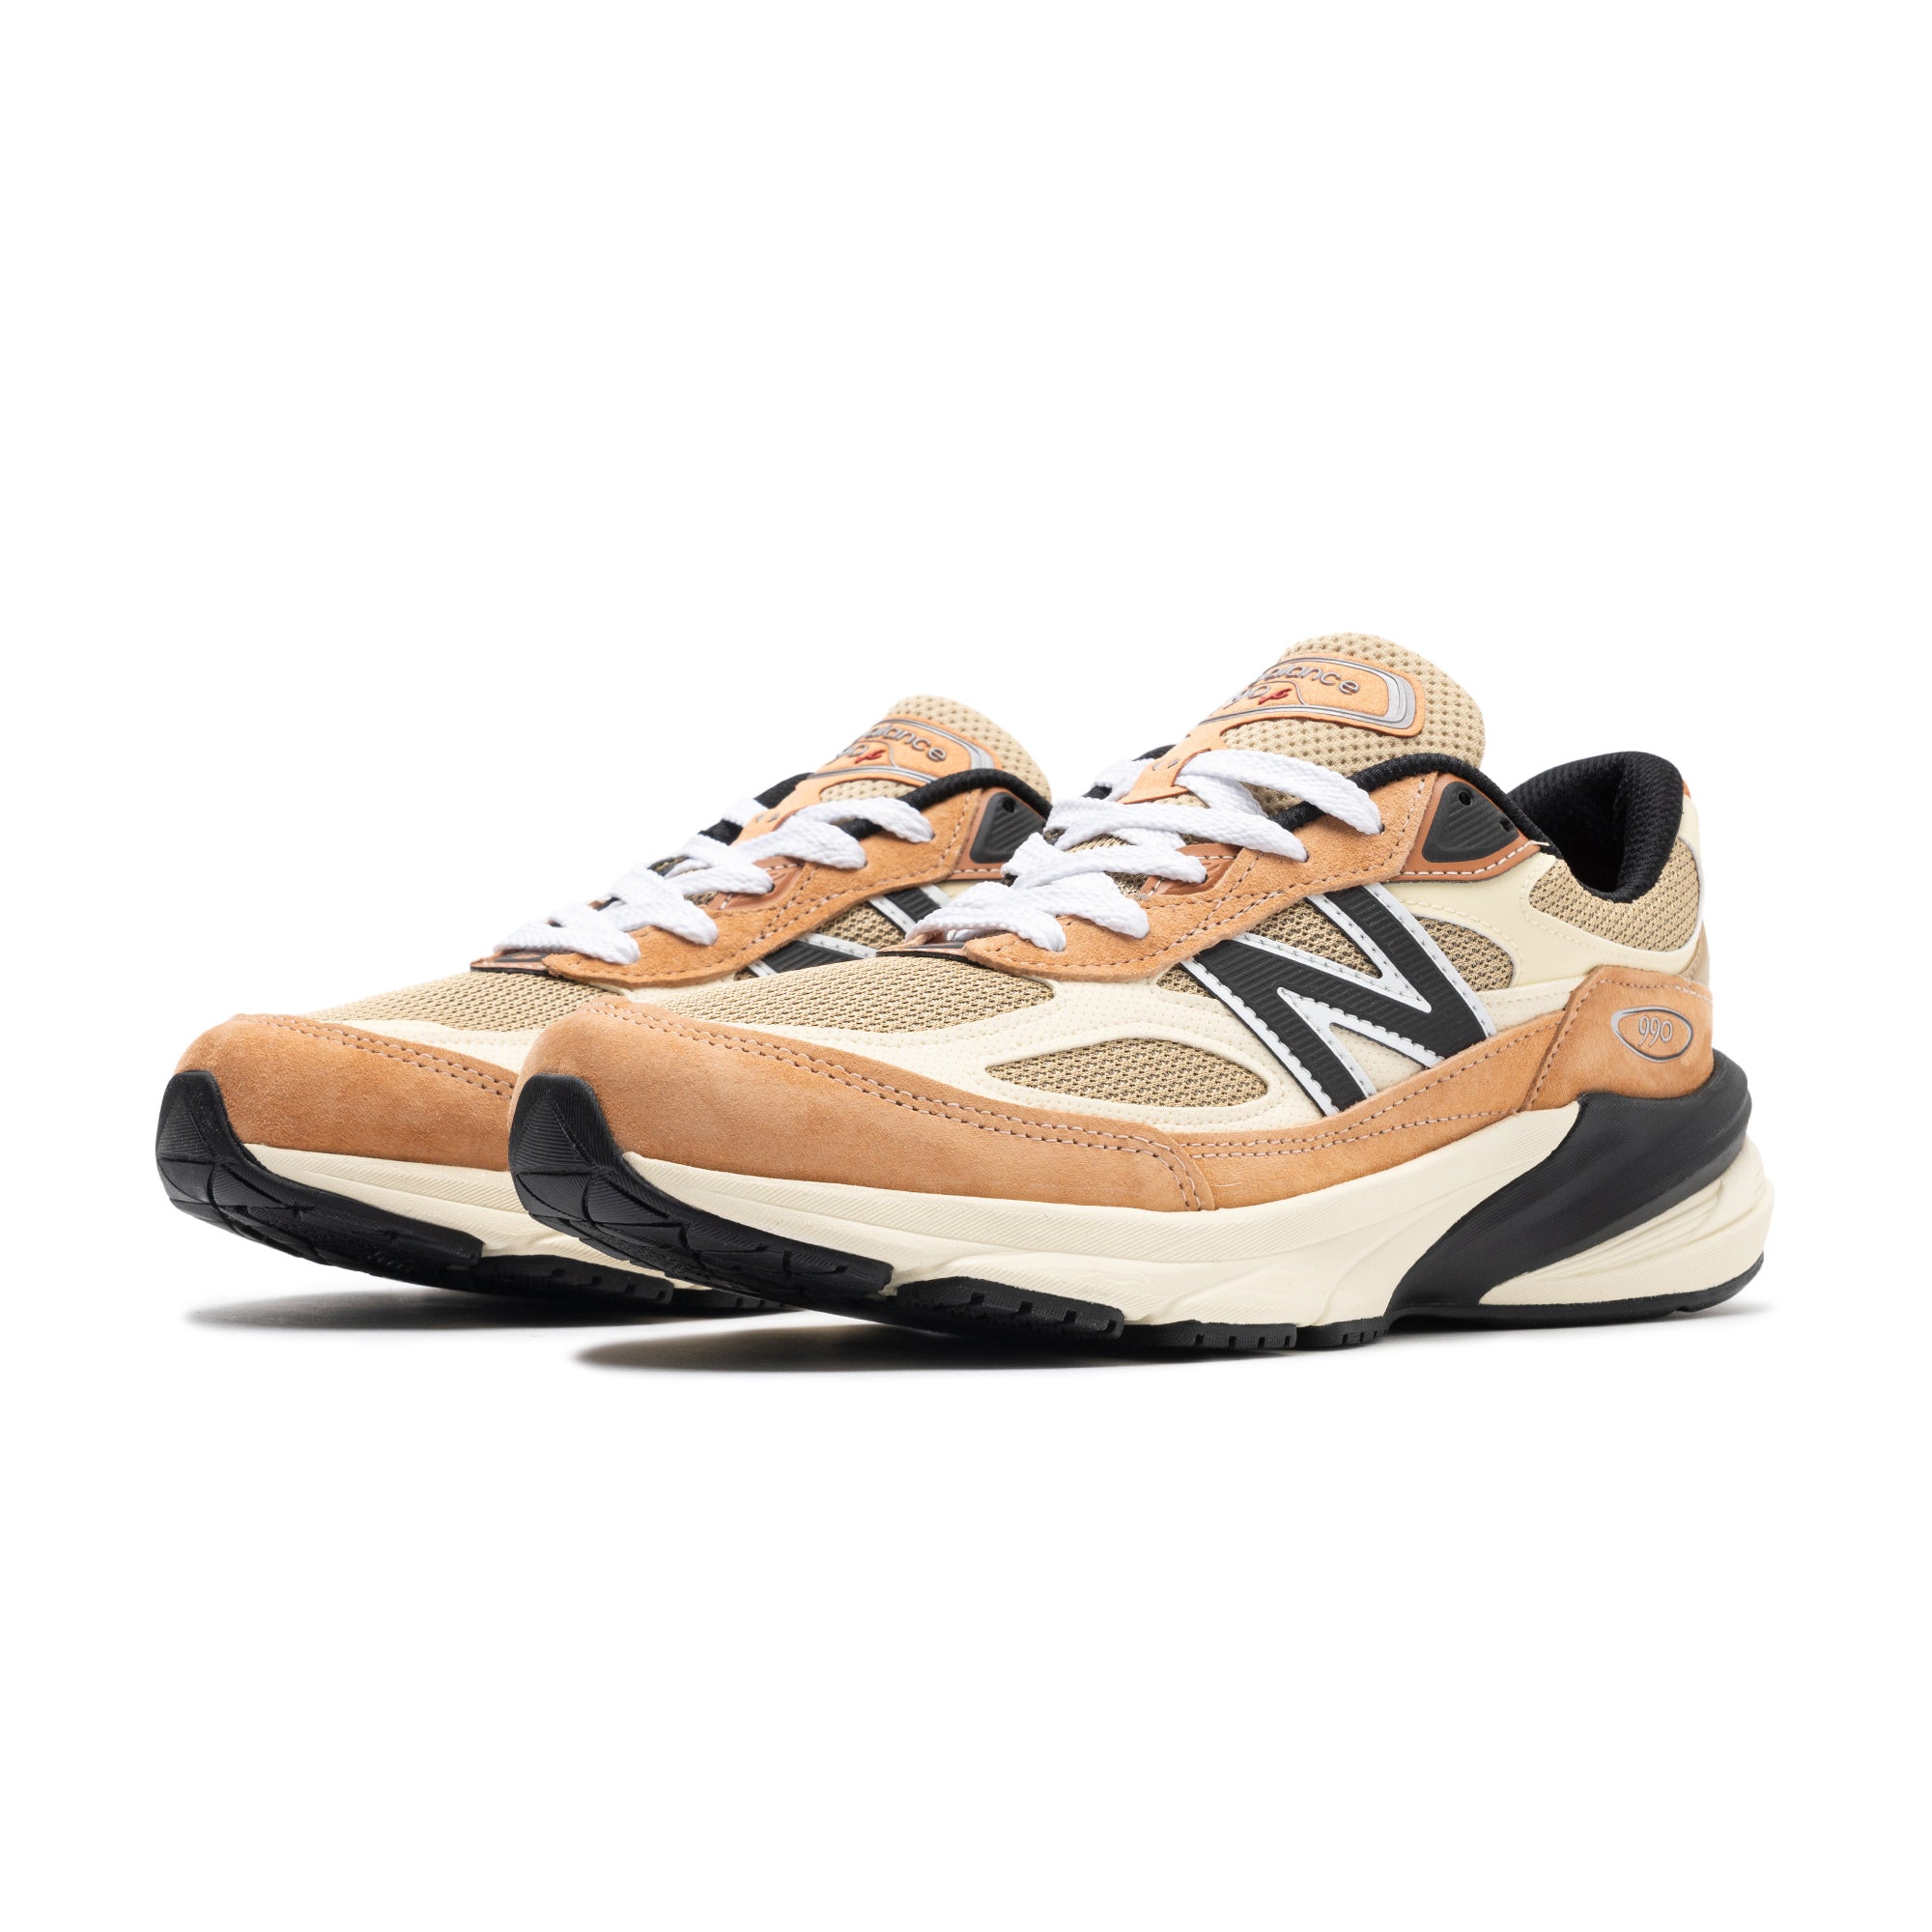 Hombres New Balance Summit Unknown GTX Black Lead Coral Glow